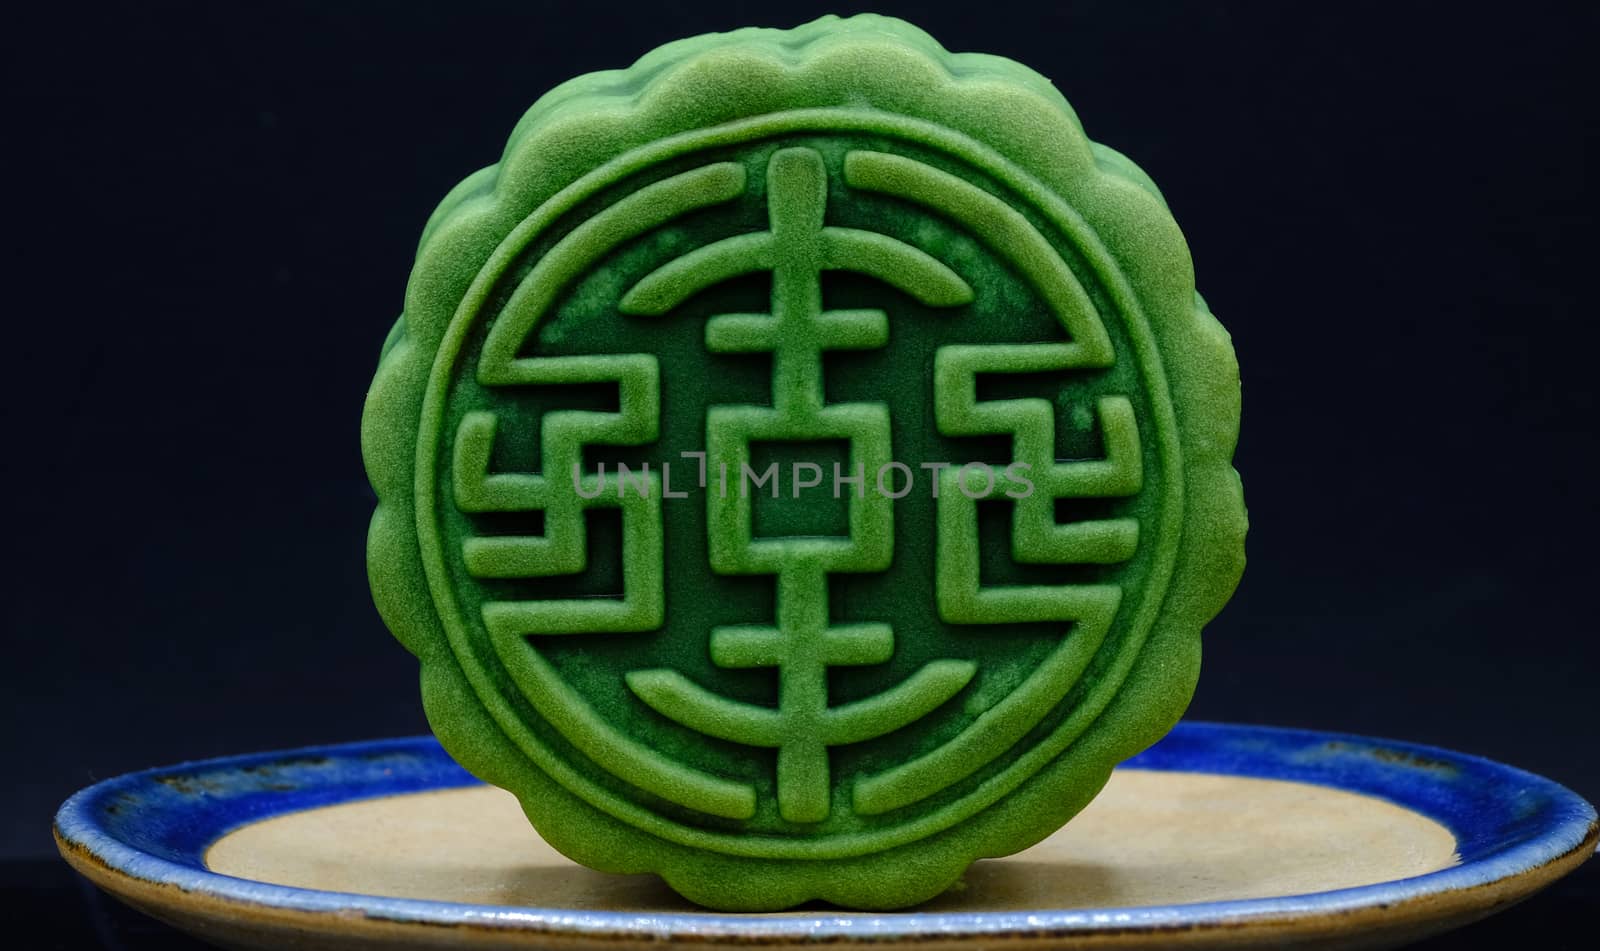 moon-cake, a traditional chinese dessert made of pastry with sweet cranberry and red bean paste fillings